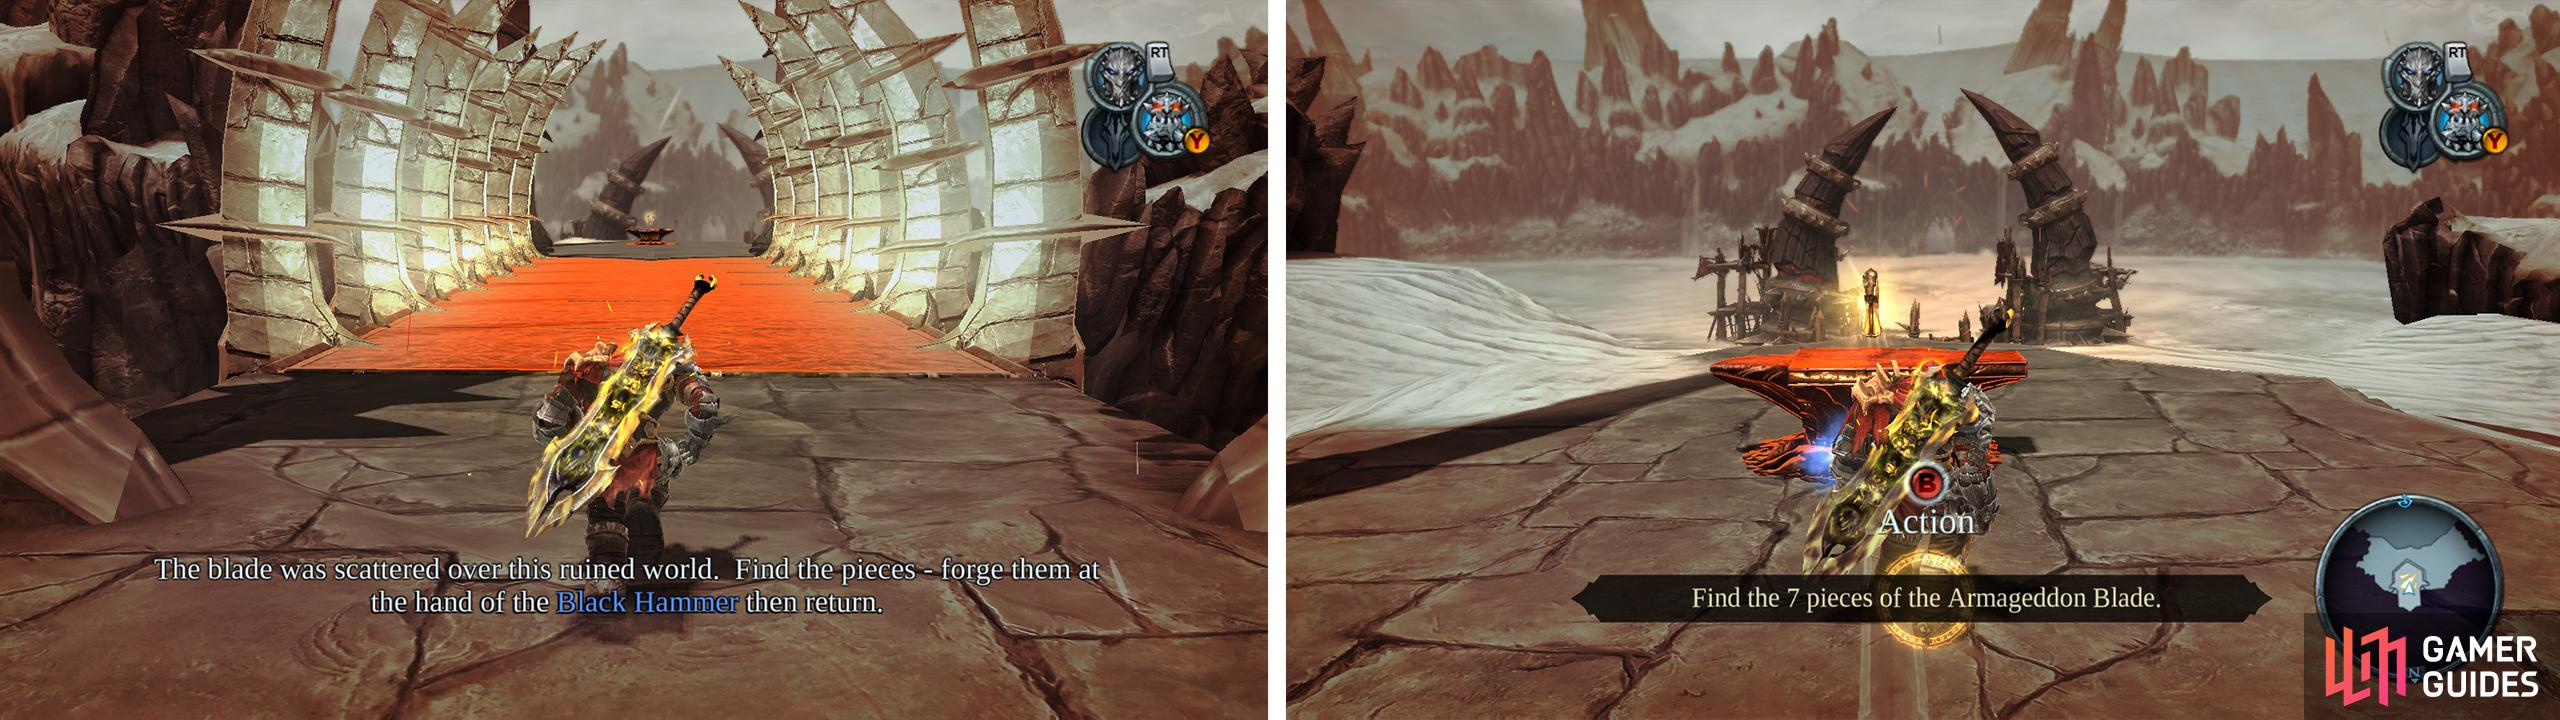 With the Mask of Shadows on cross the bridge (left) to find the first Armageddon Blade Shard (right).